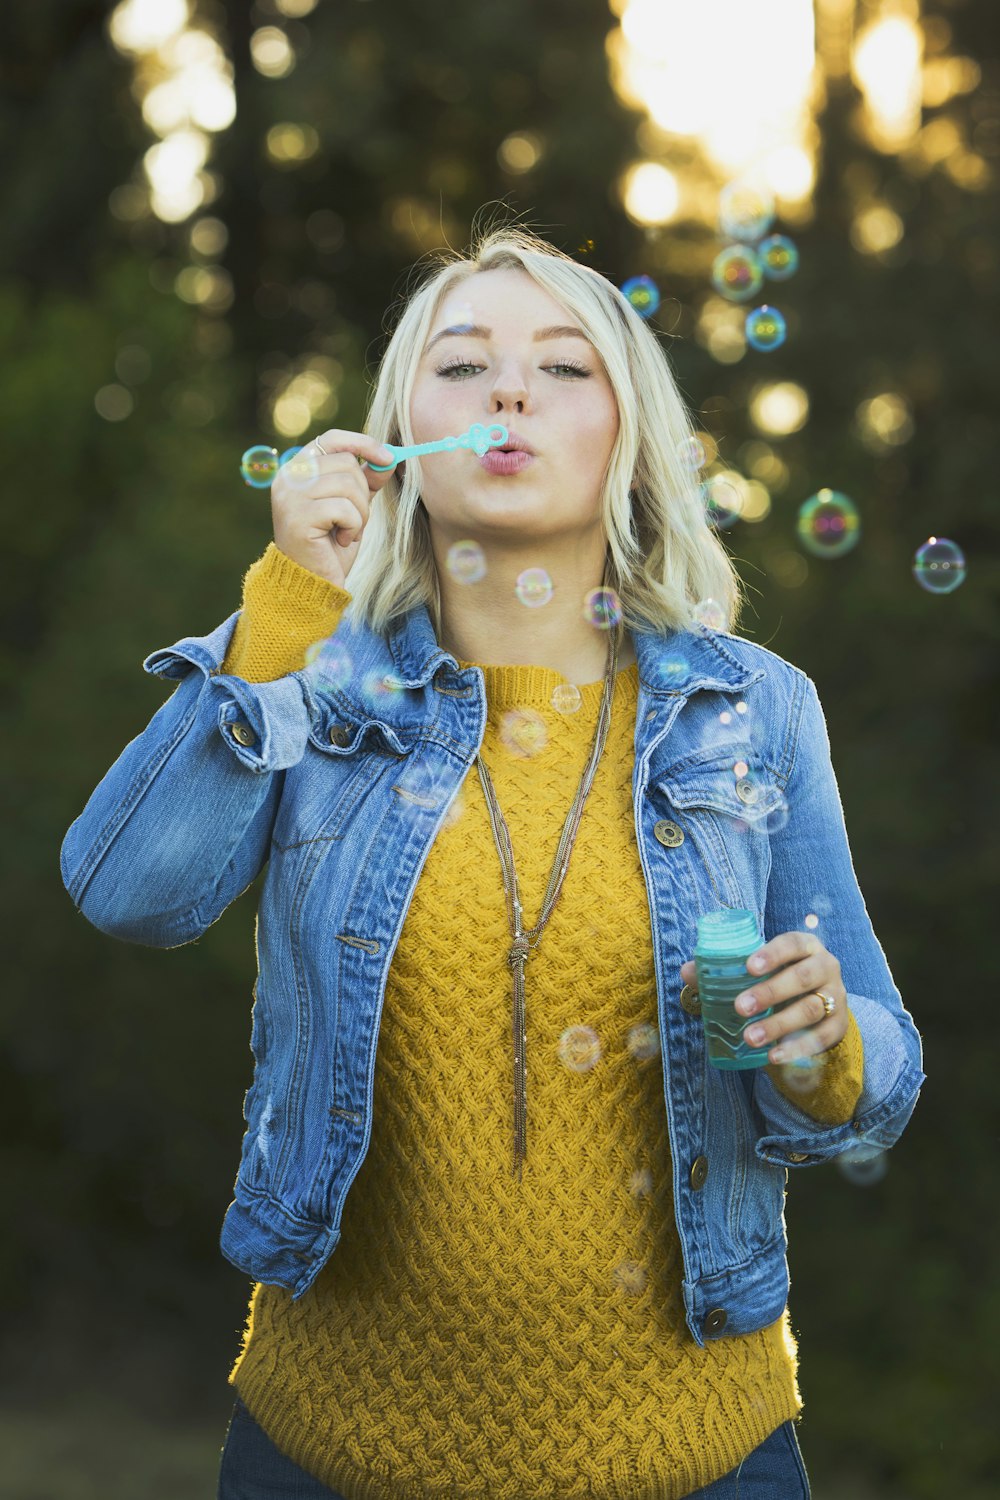 woman blowing bubble toy during daytime